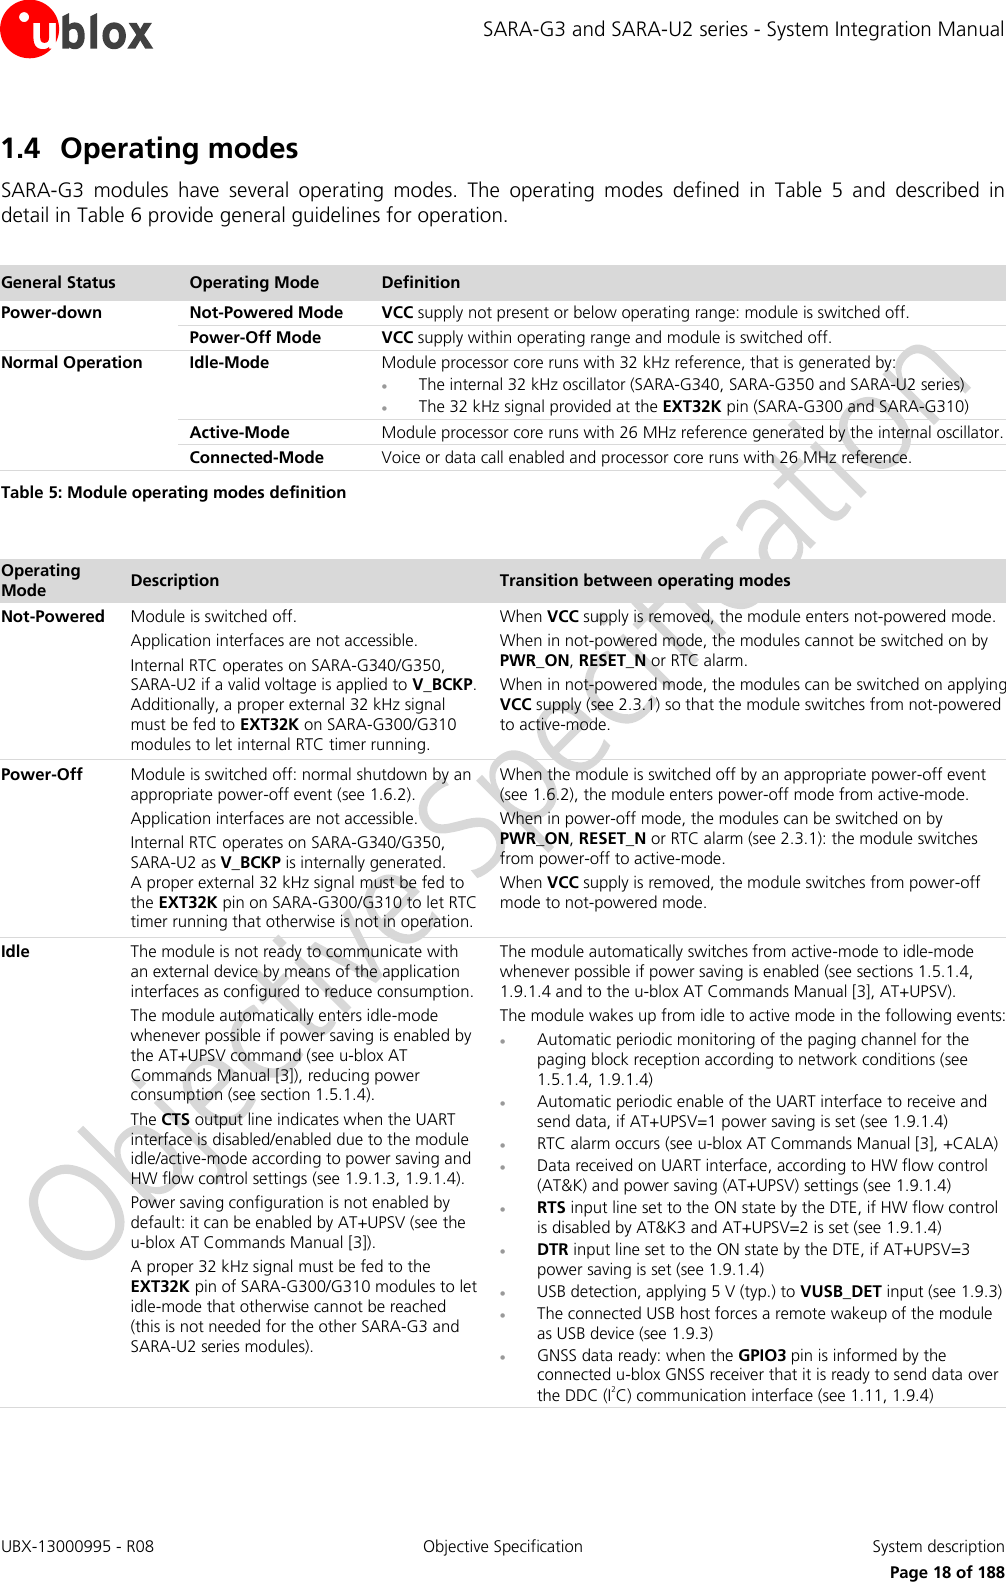 SARA-G3 and SARA-U2 series - System Integration Manual UBX-13000995 - R08  Objective Specification  System description     Page 18 of 188 1.4 Operating modes SARA-G3  modules  have  several  operating  modes.  The  operating  modes  defined  in  Table  5  and  described  in detail in Table 6 provide general guidelines for operation.  General Status Operating Mode Definition Power-down Not-Powered Mode VCC supply not present or below operating range: module is switched off.  Power-Off Mode VCC supply within operating range and module is switched off. Normal Operation Idle-Mode Module processor core runs with 32 kHz reference, that is generated by:  The internal 32 kHz oscillator (SARA-G340, SARA-G350 and SARA-U2 series)  The 32 kHz signal provided at the EXT32K pin (SARA-G300 and SARA-G310)  Active-Mode Module processor core runs with 26 MHz reference generated by the internal oscillator.  Connected-Mode Voice or data call enabled and processor core runs with 26 MHz reference. Table 5: Module operating modes definition  Operating Mode Description Transition between operating modes Not-Powered Module is switched off. Application interfaces are not accessible. Internal RTC operates on SARA-G340/G350, SARA-U2 if a valid voltage is applied to V_BCKP. Additionally, a proper external 32 kHz signal must be fed to EXT32K on SARA-G300/G310 modules to let internal RTC timer running. When VCC supply is removed, the module enters not-powered mode. When in not-powered mode, the modules cannot be switched on by PWR_ON, RESET_N or RTC alarm. When in not-powered mode, the modules can be switched on applying VCC supply (see 2.3.1) so that the module switches from not-powered to active-mode. Power-Off Module is switched off: normal shutdown by an appropriate power-off event (see 1.6.2). Application interfaces are not accessible. Internal RTC operates on SARA-G340/G350, SARA-U2 as V_BCKP is internally generated.  A proper external 32 kHz signal must be fed to the EXT32K pin on SARA-G300/G310 to let RTC timer running that otherwise is not in operation. When the module is switched off by an appropriate power-off event (see 1.6.2), the module enters power-off mode from active-mode. When in power-off mode, the modules can be switched on by PWR_ON, RESET_N or RTC alarm (see 2.3.1): the module switches from power-off to active-mode. When VCC supply is removed, the module switches from power-off mode to not-powered mode. Idle The module is not ready to communicate with an external device by means of the application interfaces as configured to reduce consumption. The module automatically enters idle-mode whenever possible if power saving is enabled by the AT+UPSV command (see u-blox AT Commands Manual [3]), reducing power consumption (see section 1.5.1.4). The CTS output line indicates when the UART interface is disabled/enabled due to the module idle/active-mode according to power saving and HW flow control settings (see 1.9.1.3, 1.9.1.4). Power saving configuration is not enabled by default: it can be enabled by AT+UPSV (see the u-blox AT Commands Manual [3]). A proper 32 kHz signal must be fed to the EXT32K pin of SARA-G300/G310 modules to let  idle-mode that otherwise cannot be reached (this is not needed for the other SARA-G3 and SARA-U2 series modules). The module automatically switches from active-mode to idle-mode whenever possible if power saving is enabled (see sections 1.5.1.4, 1.9.1.4 and to the u-blox AT Commands Manual [3], AT+UPSV). The module wakes up from idle to active mode in the following events:  Automatic periodic monitoring of the paging channel for the paging block reception according to network conditions (see 1.5.1.4, 1.9.1.4)  Automatic periodic enable of the UART interface to receive and send data, if AT+UPSV=1 power saving is set (see 1.9.1.4)  RTC alarm occurs (see u-blox AT Commands Manual [3], +CALA)  Data received on UART interface, according to HW flow control (AT&amp;K) and power saving (AT+UPSV) settings (see 1.9.1.4)  RTS input line set to the ON state by the DTE, if HW flow control is disabled by AT&amp;K3 and AT+UPSV=2 is set (see 1.9.1.4)  DTR input line set to the ON state by the DTE, if AT+UPSV=3 power saving is set (see 1.9.1.4)  USB detection, applying 5 V (typ.) to VUSB_DET input (see 1.9.3)  The connected USB host forces a remote wakeup of the module as USB device (see 1.9.3)  GNSS data ready: when the GPIO3 pin is informed by the connected u-blox GNSS receiver that it is ready to send data over the DDC (I2C) communication interface (see 1.11, 1.9.4) 